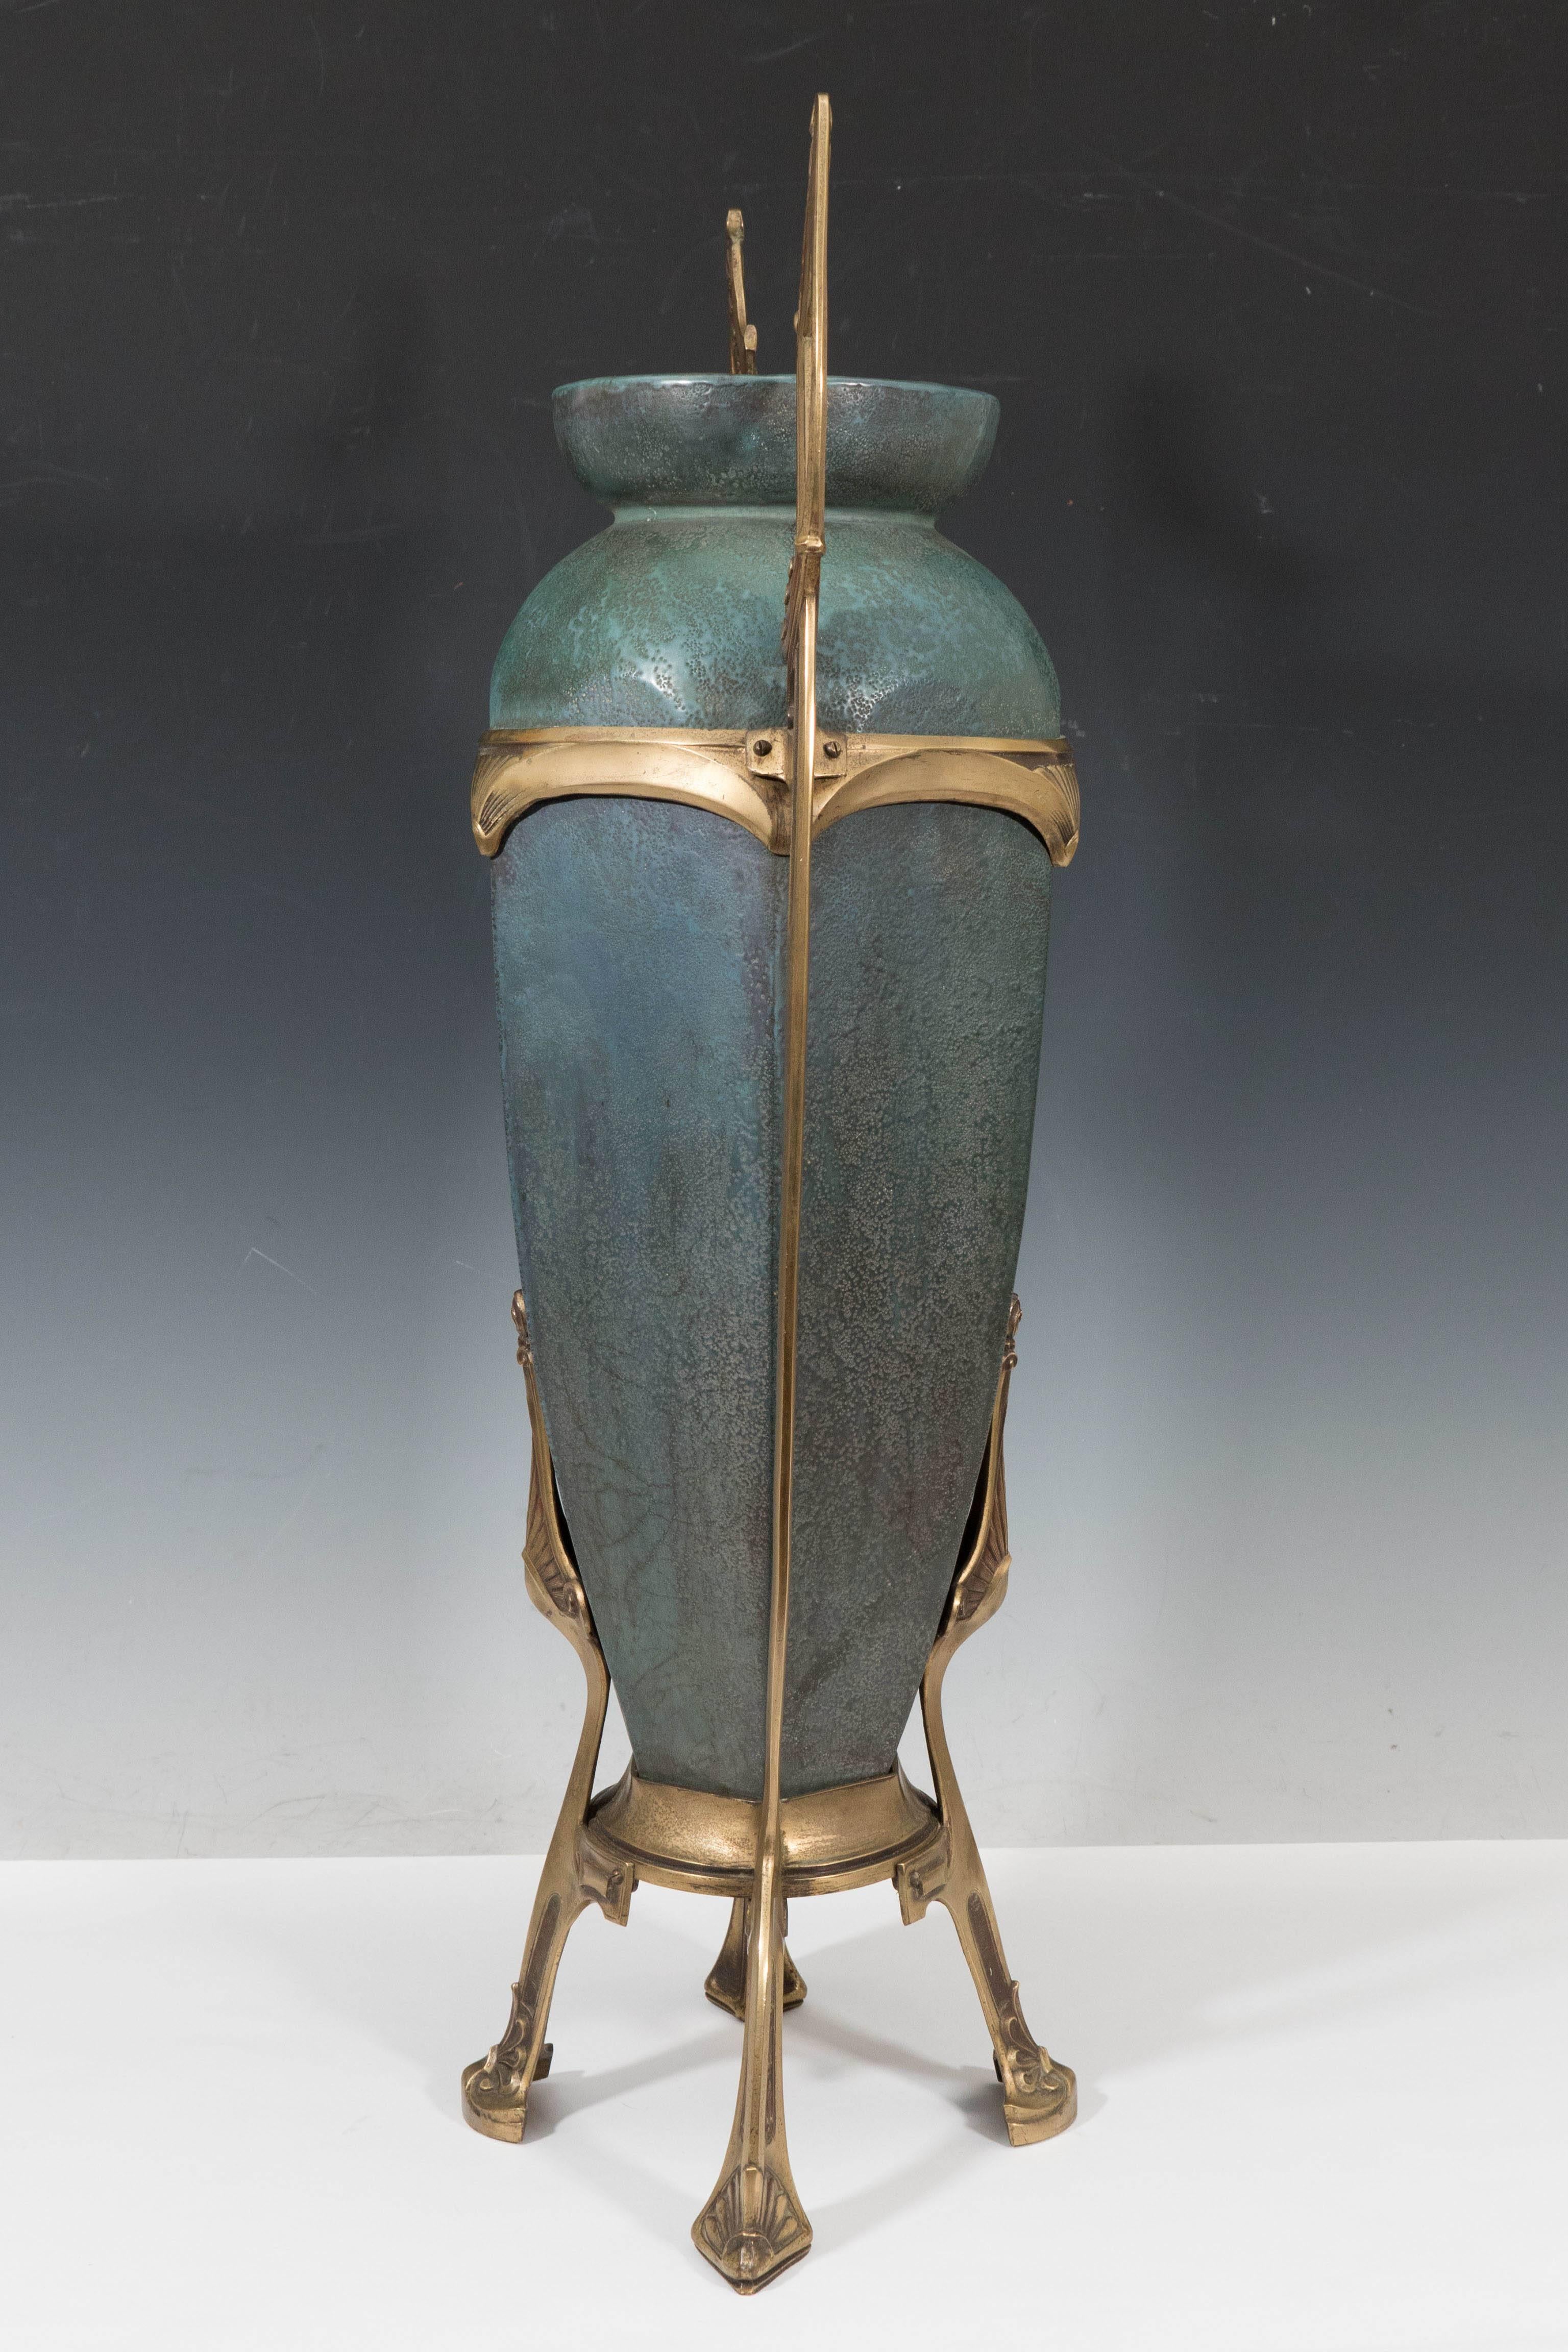 Amphora Early 20th Century Bronze-Mounted Ceramic Vase by Paul Dachsel 2